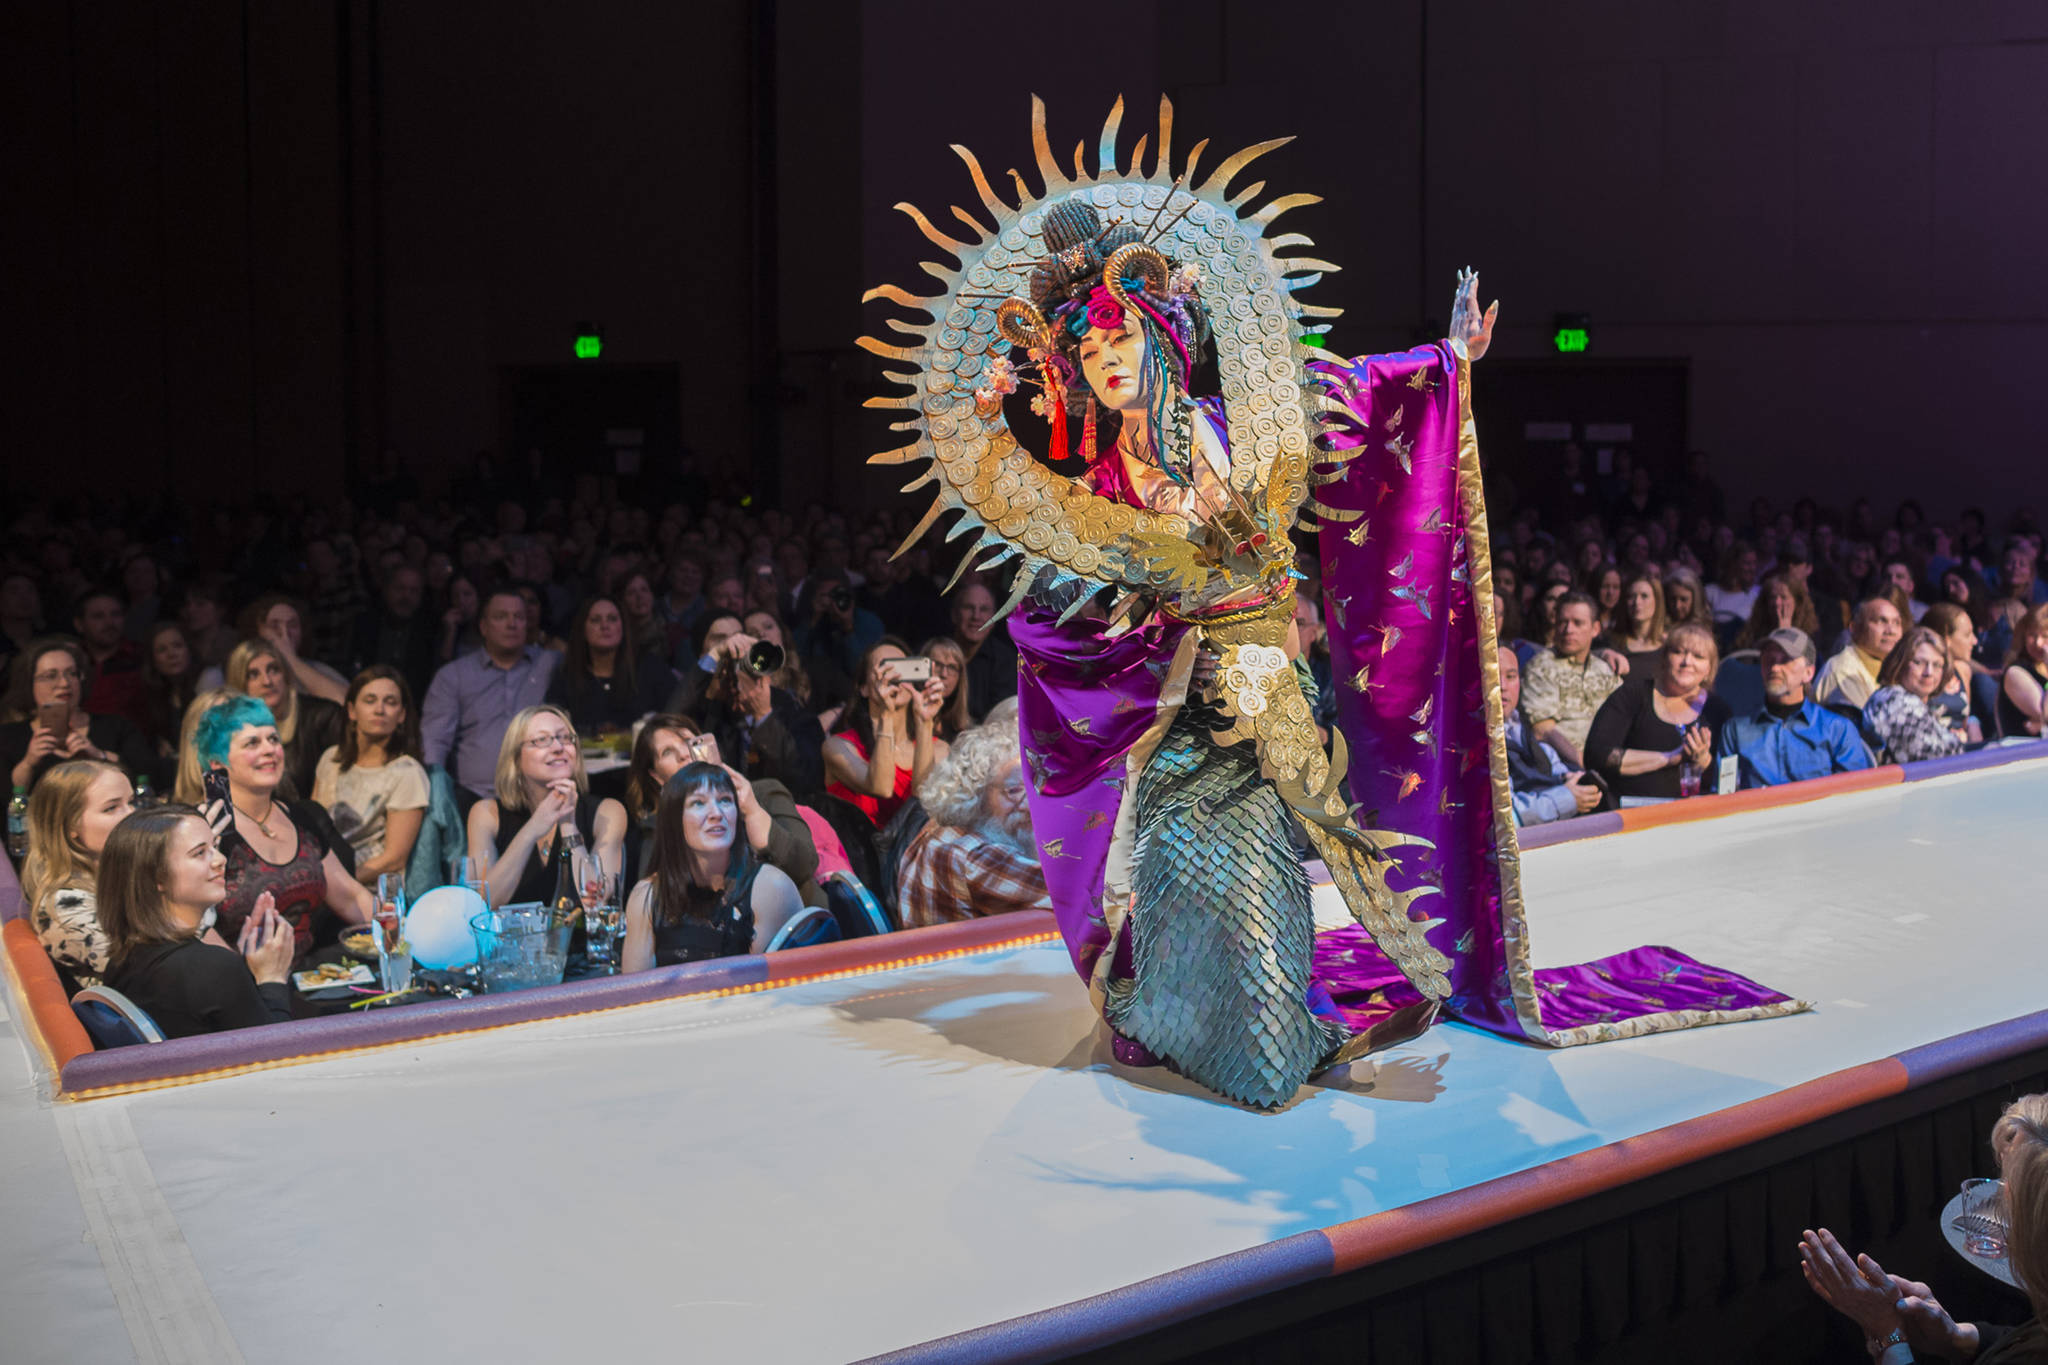 “Doragon” by Beth Bolander, modeled by Dani Gross, at the Wearable Art Show at Centennial Hall on Saturday, Feb. 17, 2018. Doragon placed third in the Juror’s Best in Show. It also drew criticism as cultural appropriation, which led to some guidelines for this year’s fashion show. (Michael Penn | Juneau Empire File)